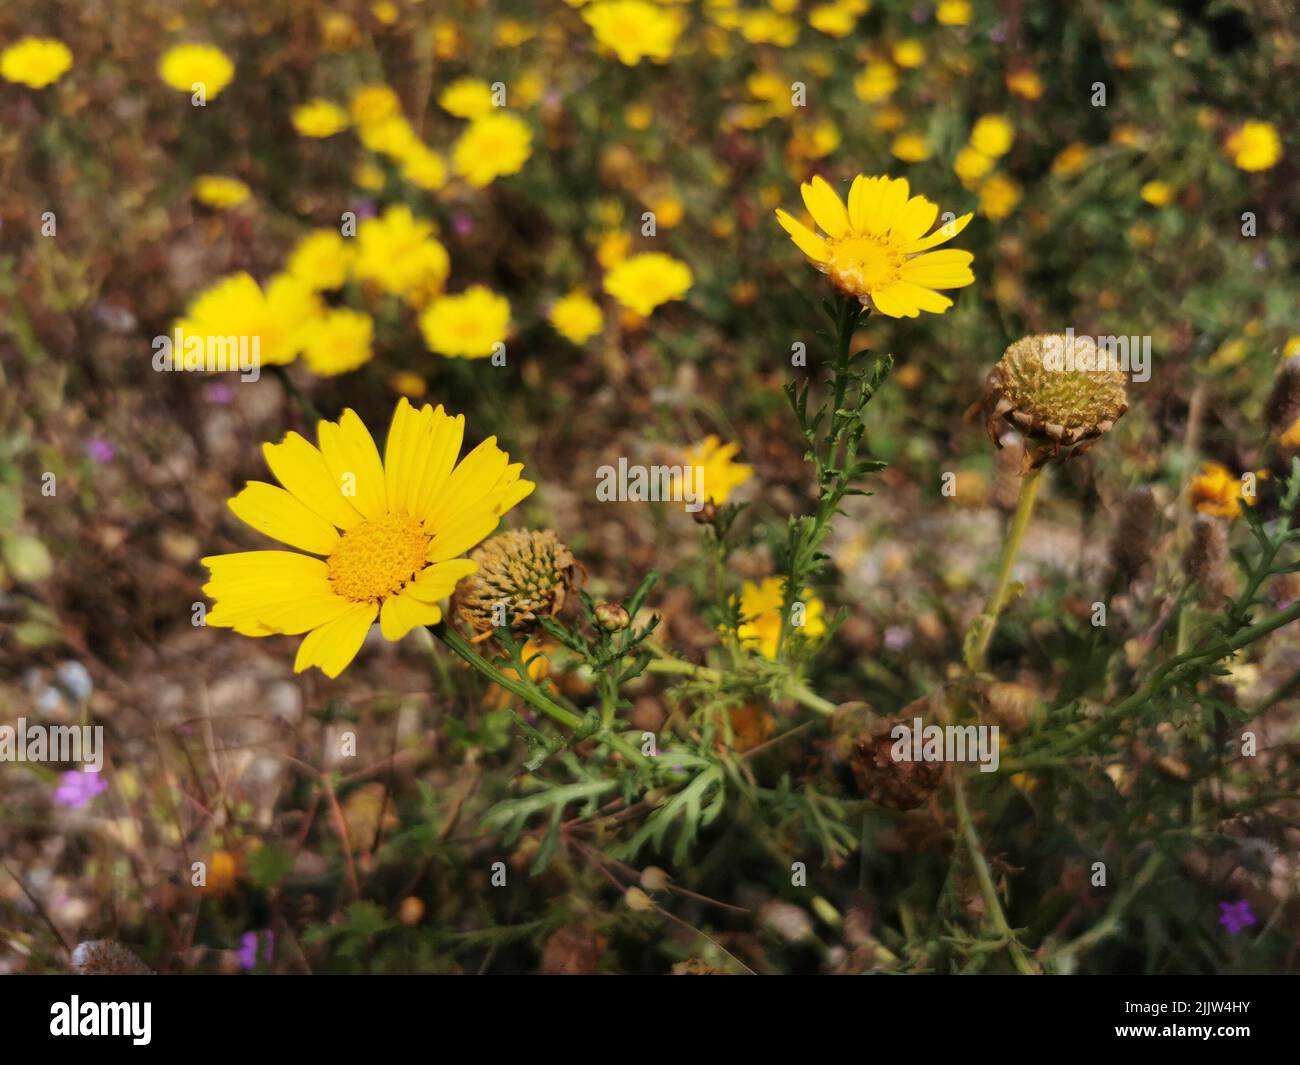 A closeup of Tetraneuris scaposa (Stemmy four-nerve daisy) flowers growing in a field Stock Photo